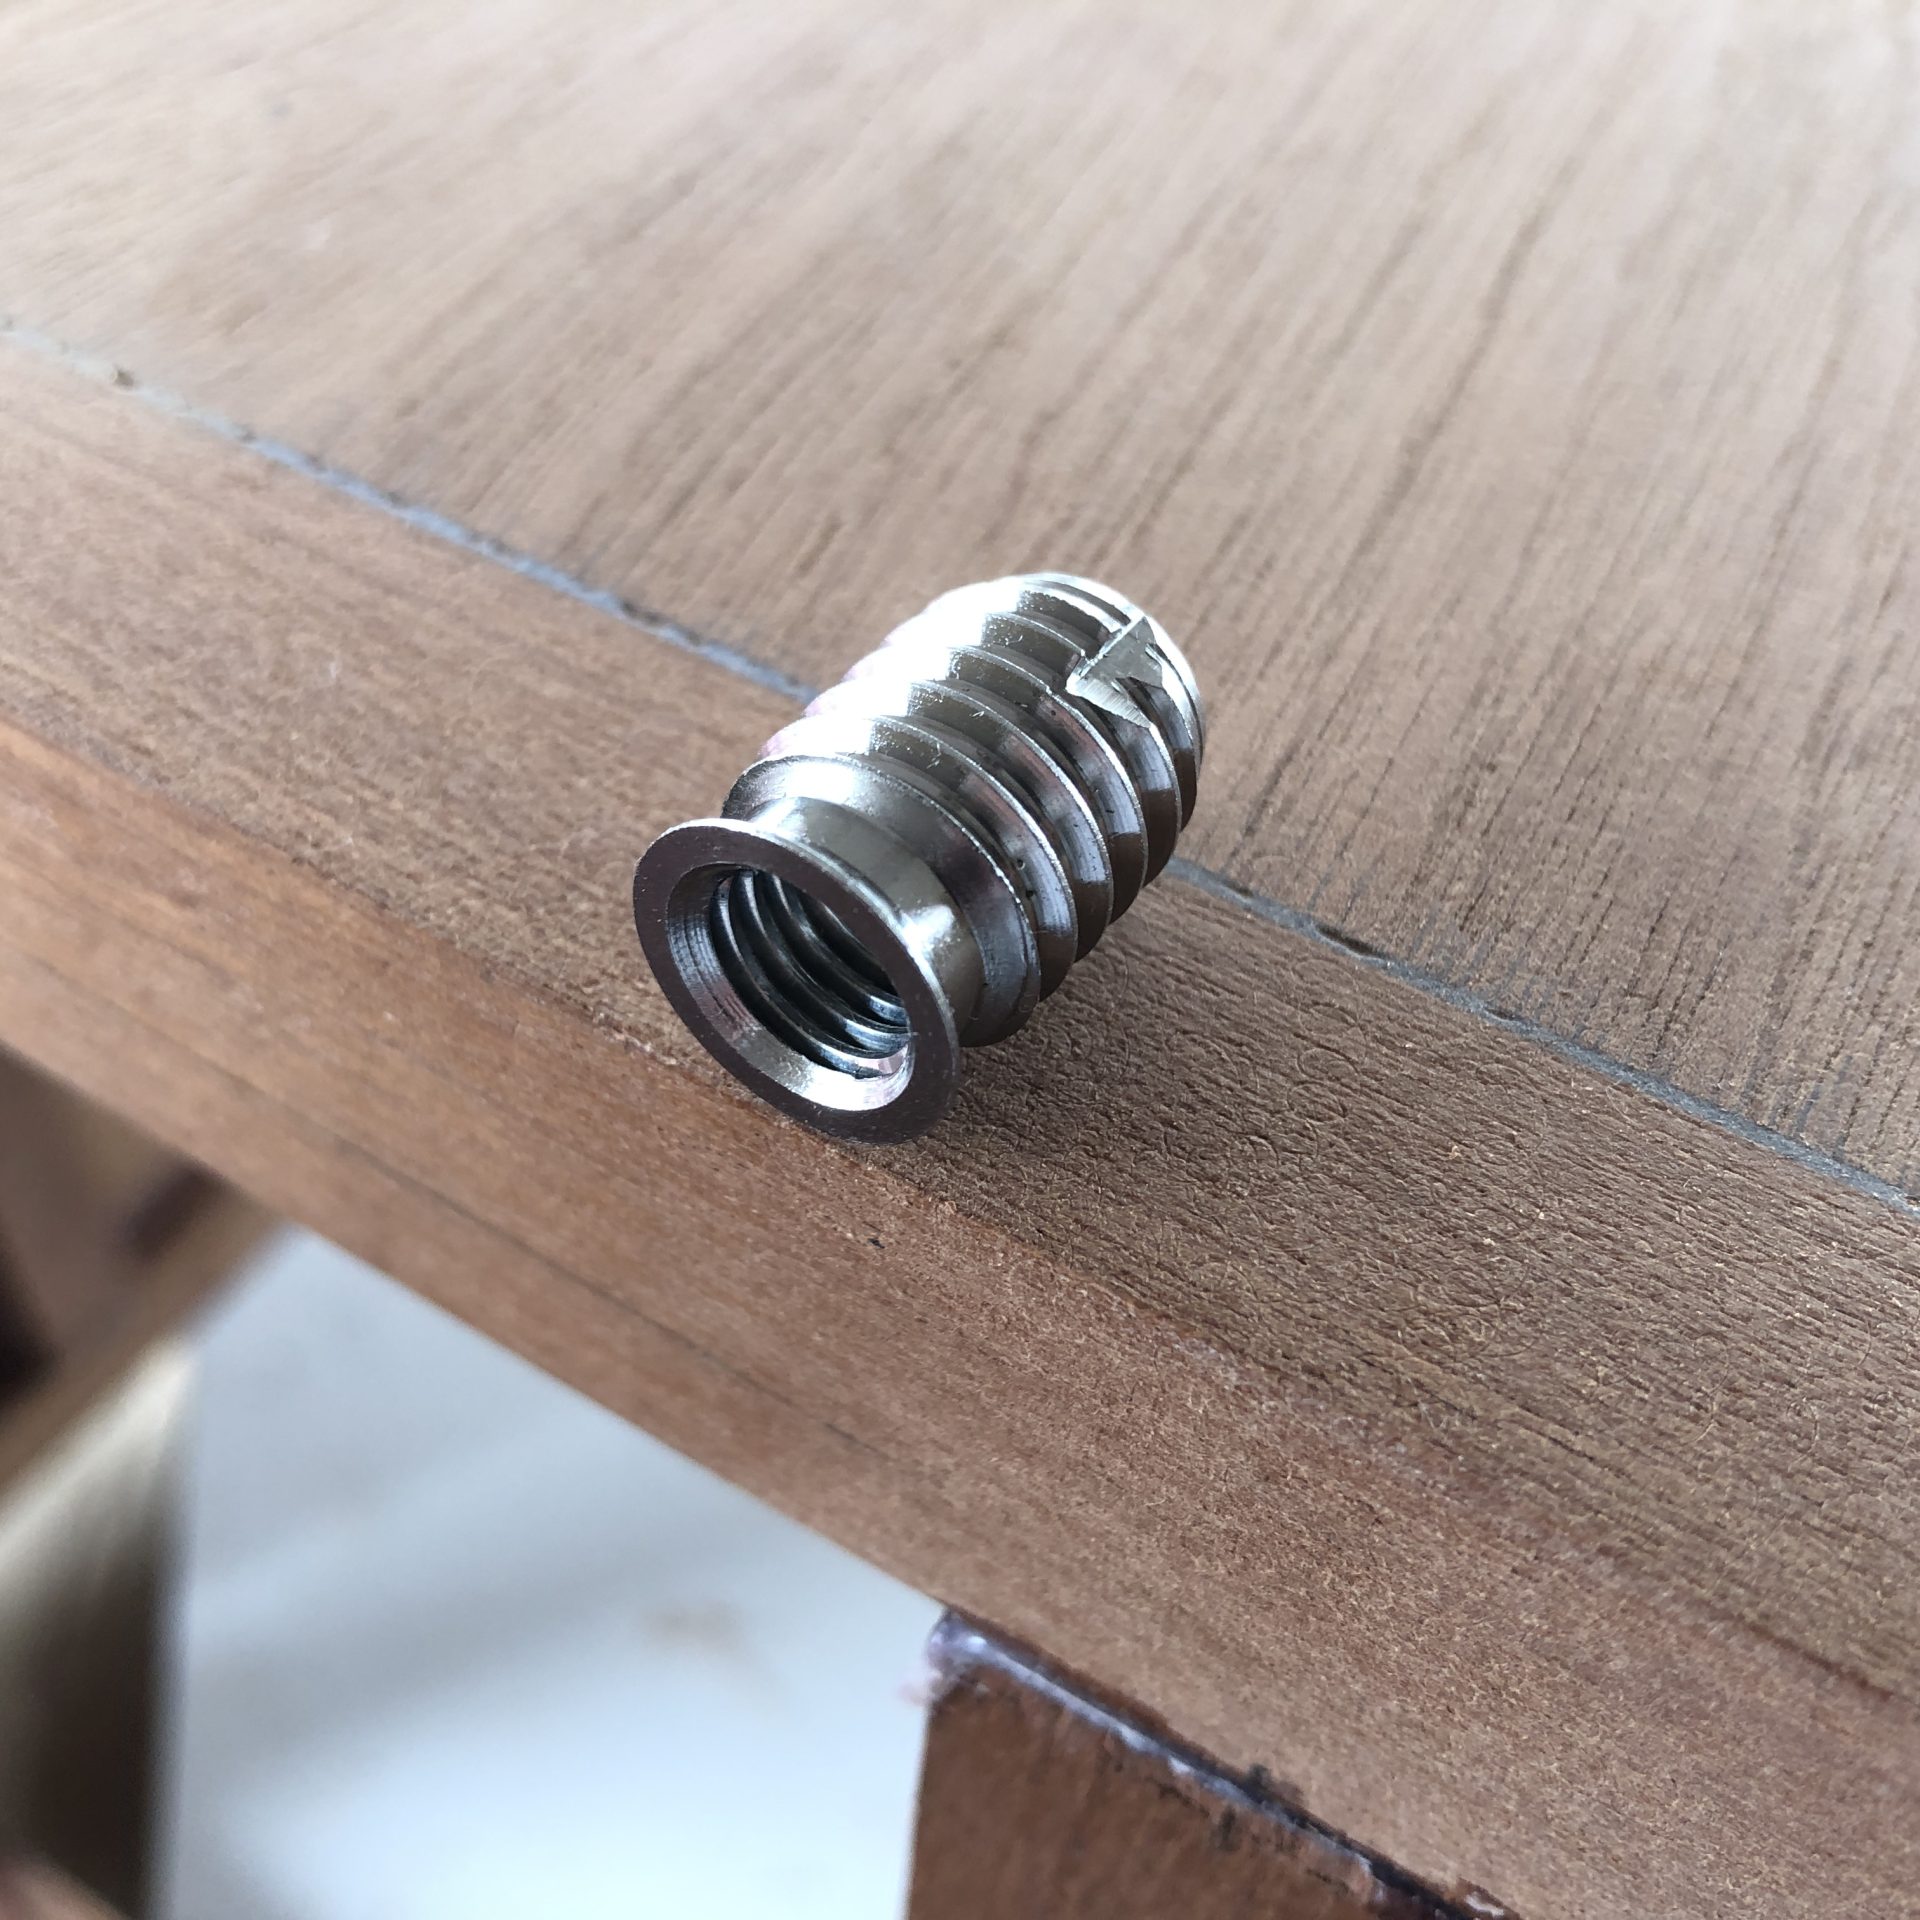 Stainless steel M10 threaded inserts for wood to attach seat box to plinth